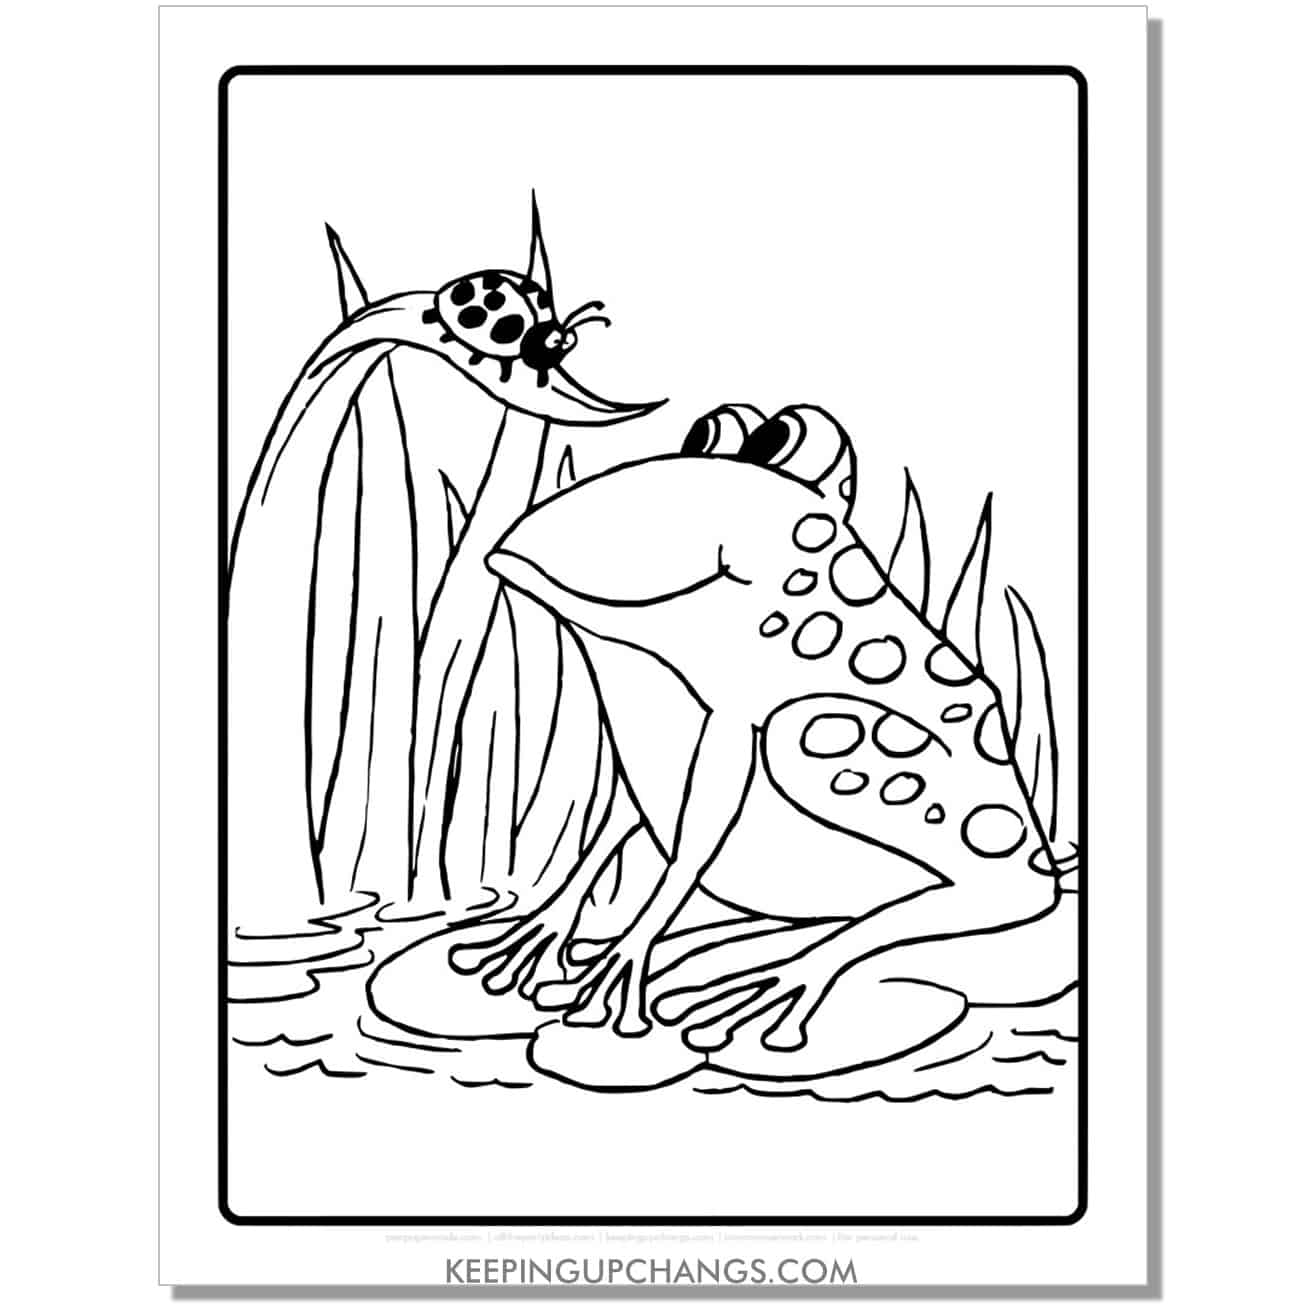 free hand drawn frog coloring page, sheet with ladybug.